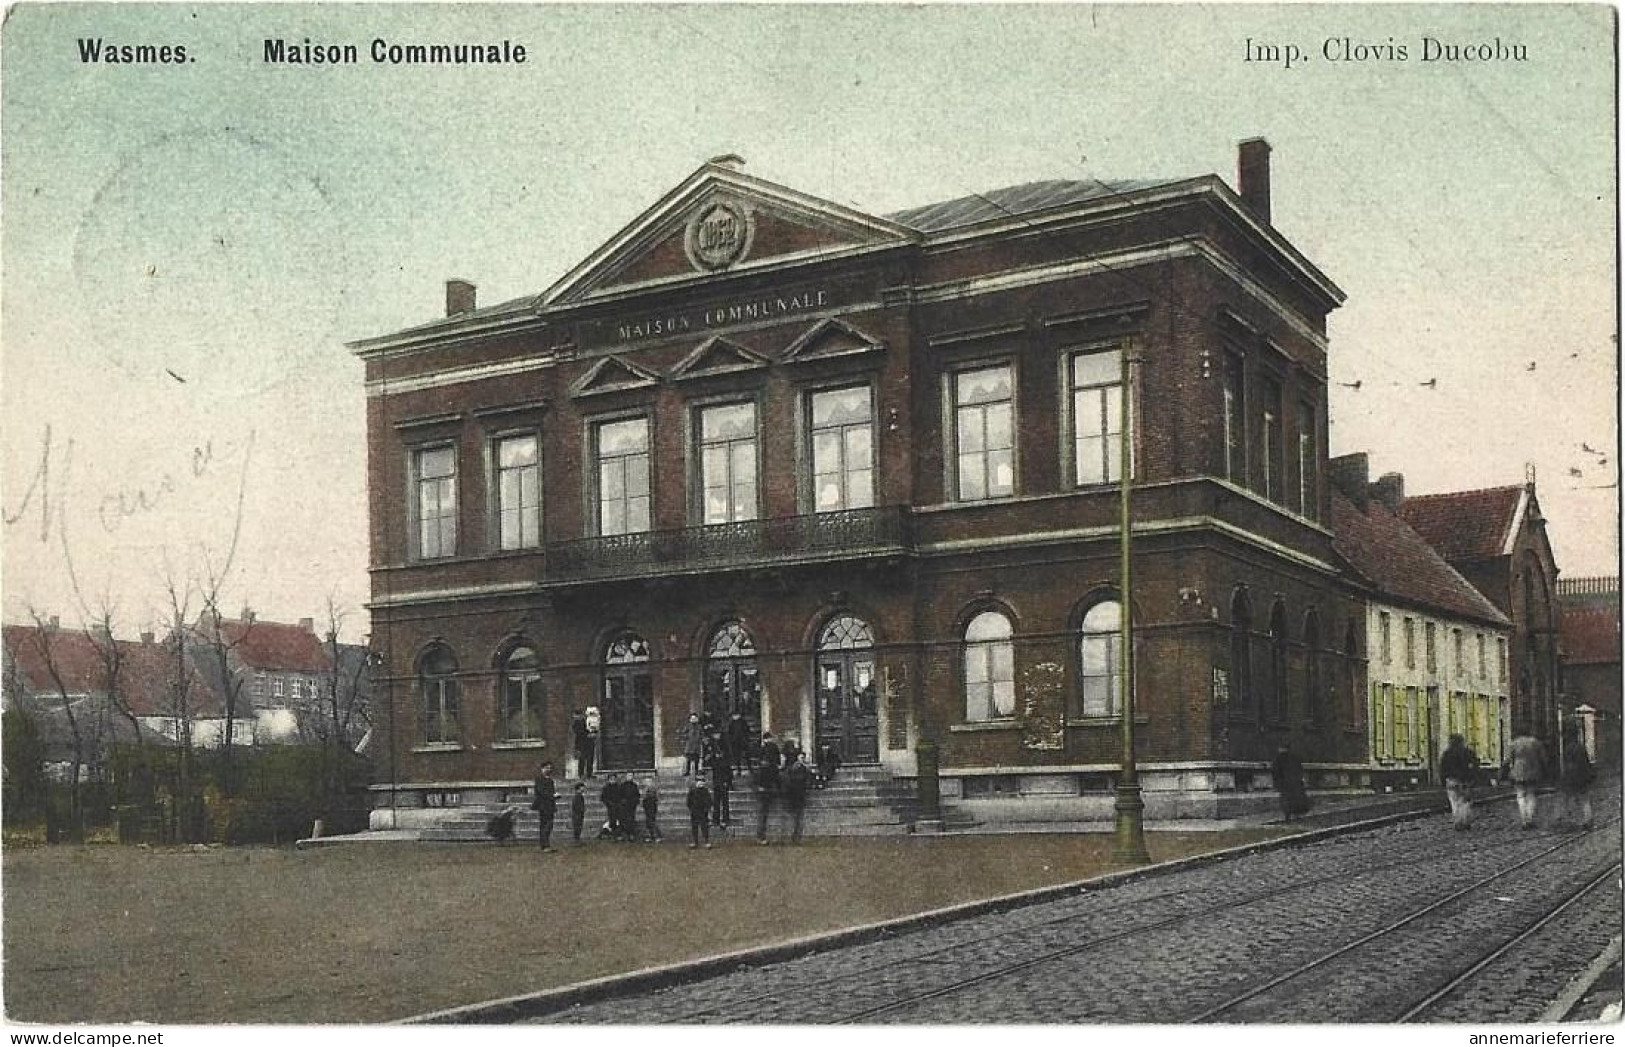 Wasmes Maison Communale - Colfontaine